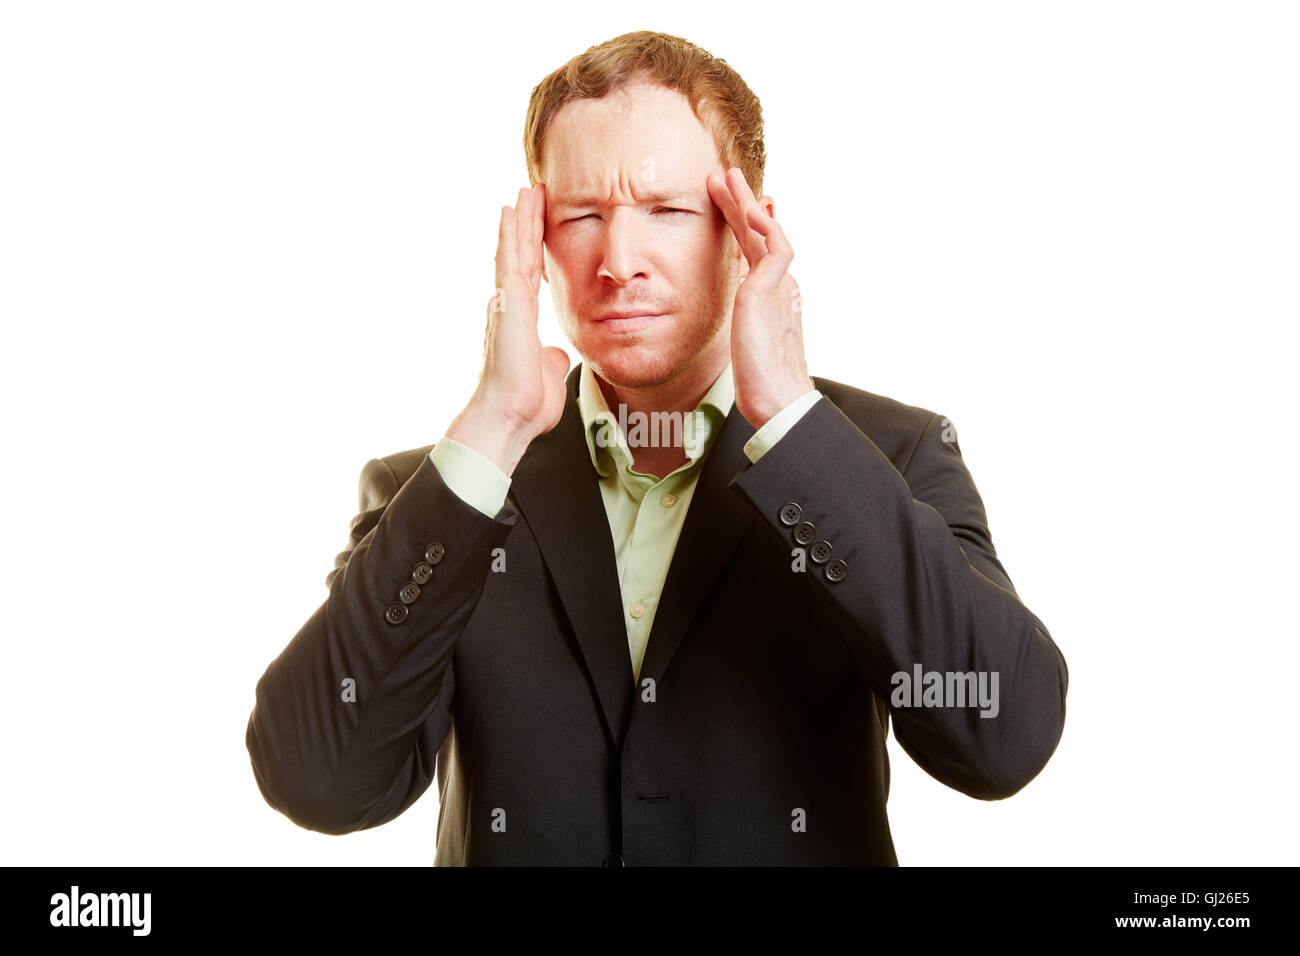 Man with migraine holding his hands on his temples and looking frustrated Stock Photo